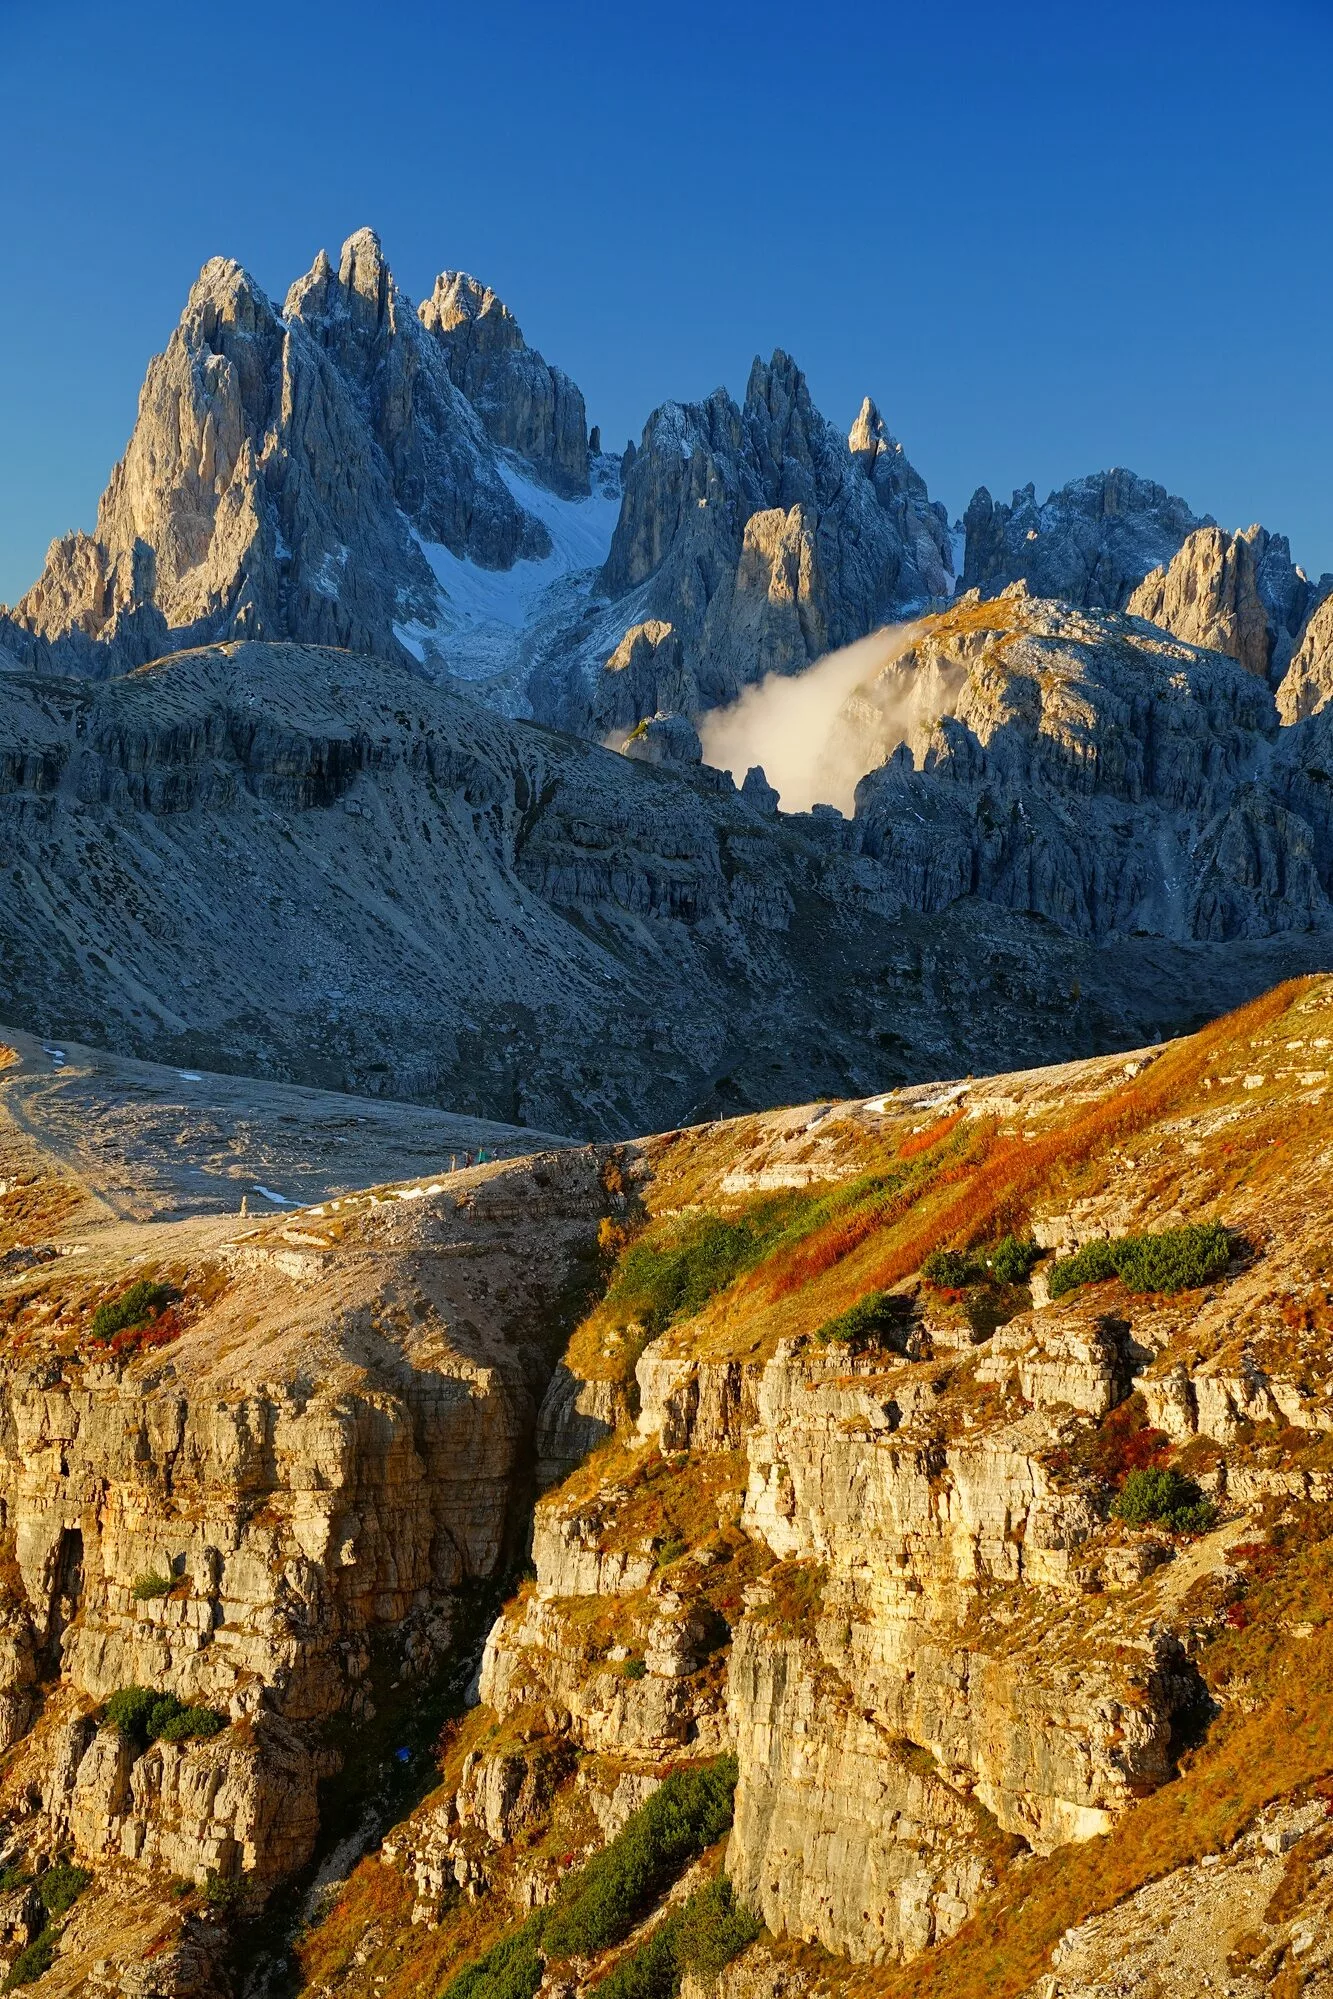 Venice and the Dolomites Photo experience